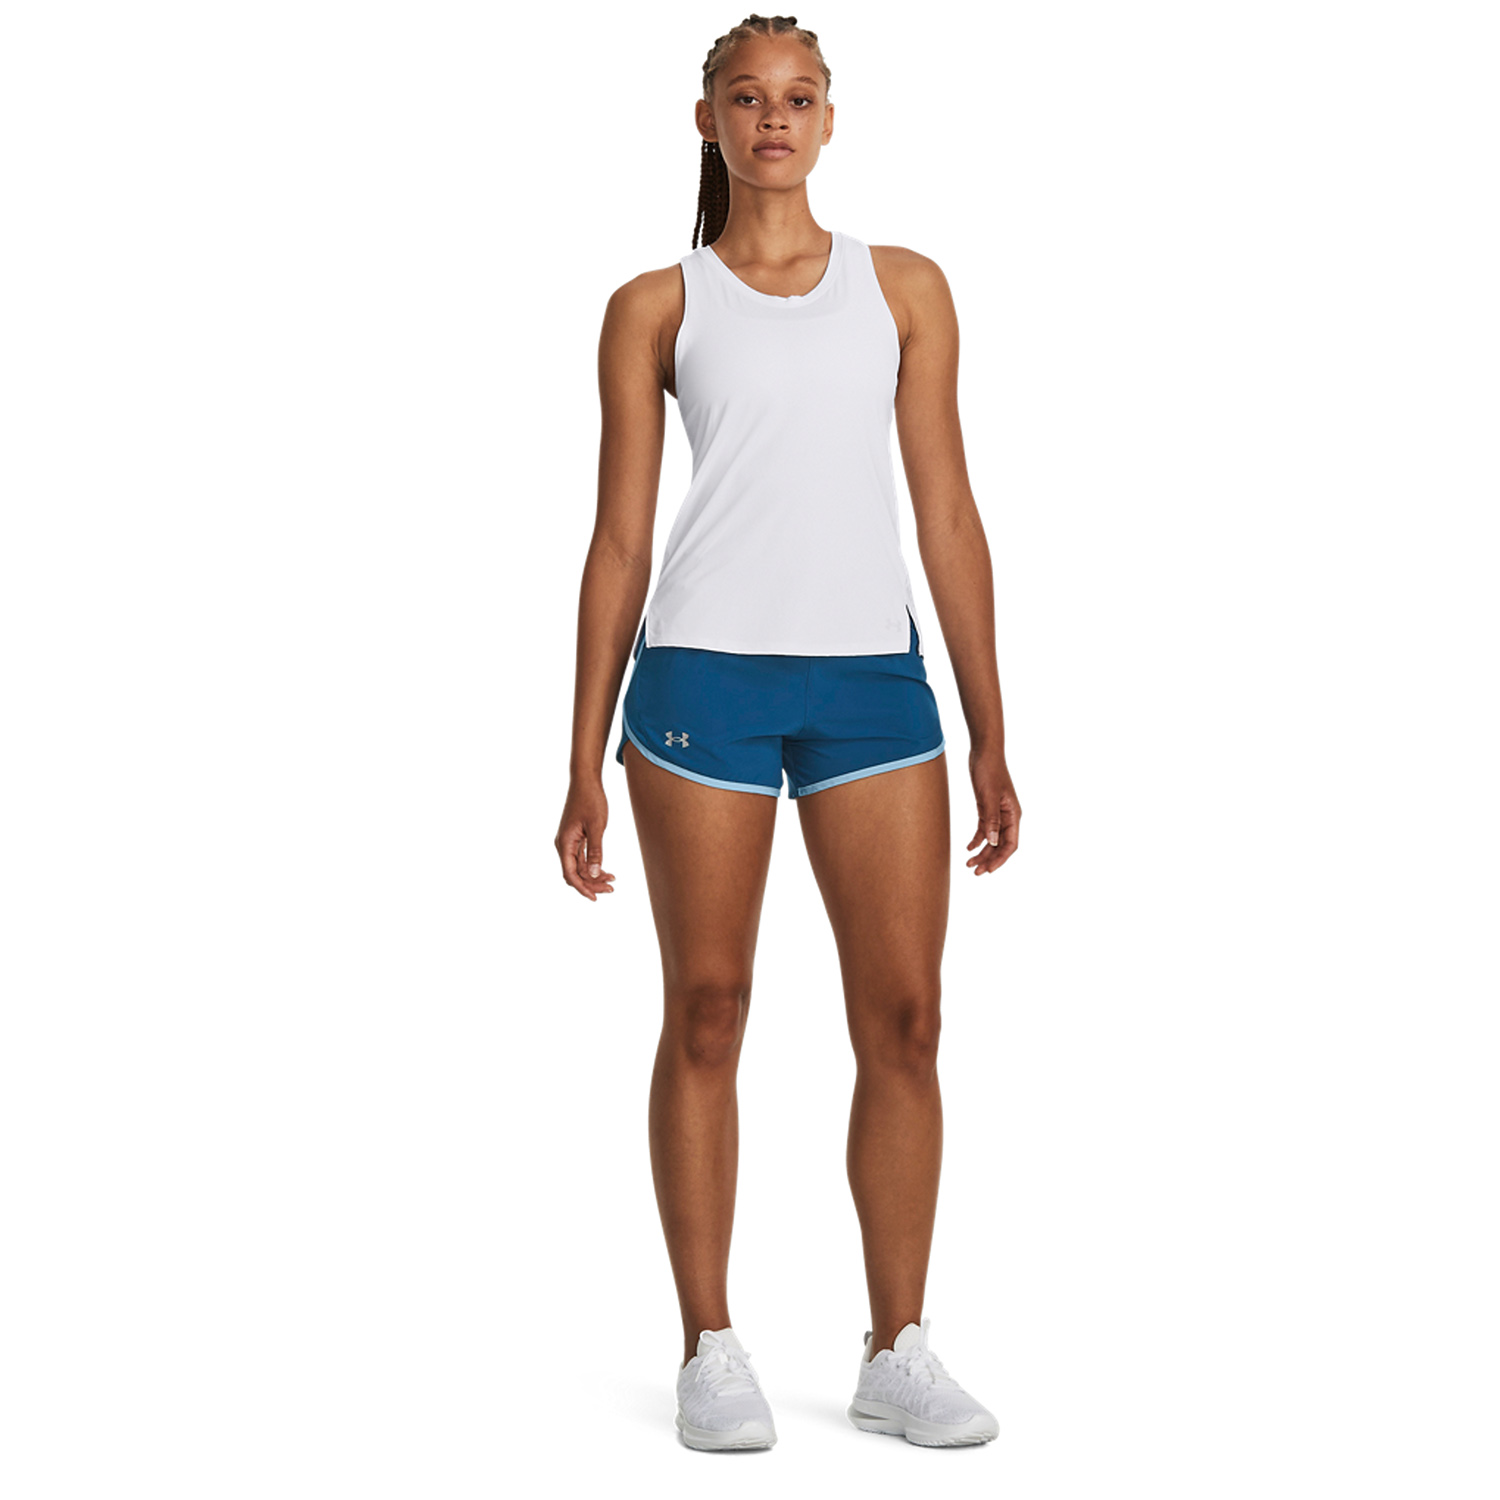 Under Armour Fly By 2.0 3in Shorts - Varsity Blue/Blizzard/Reflective